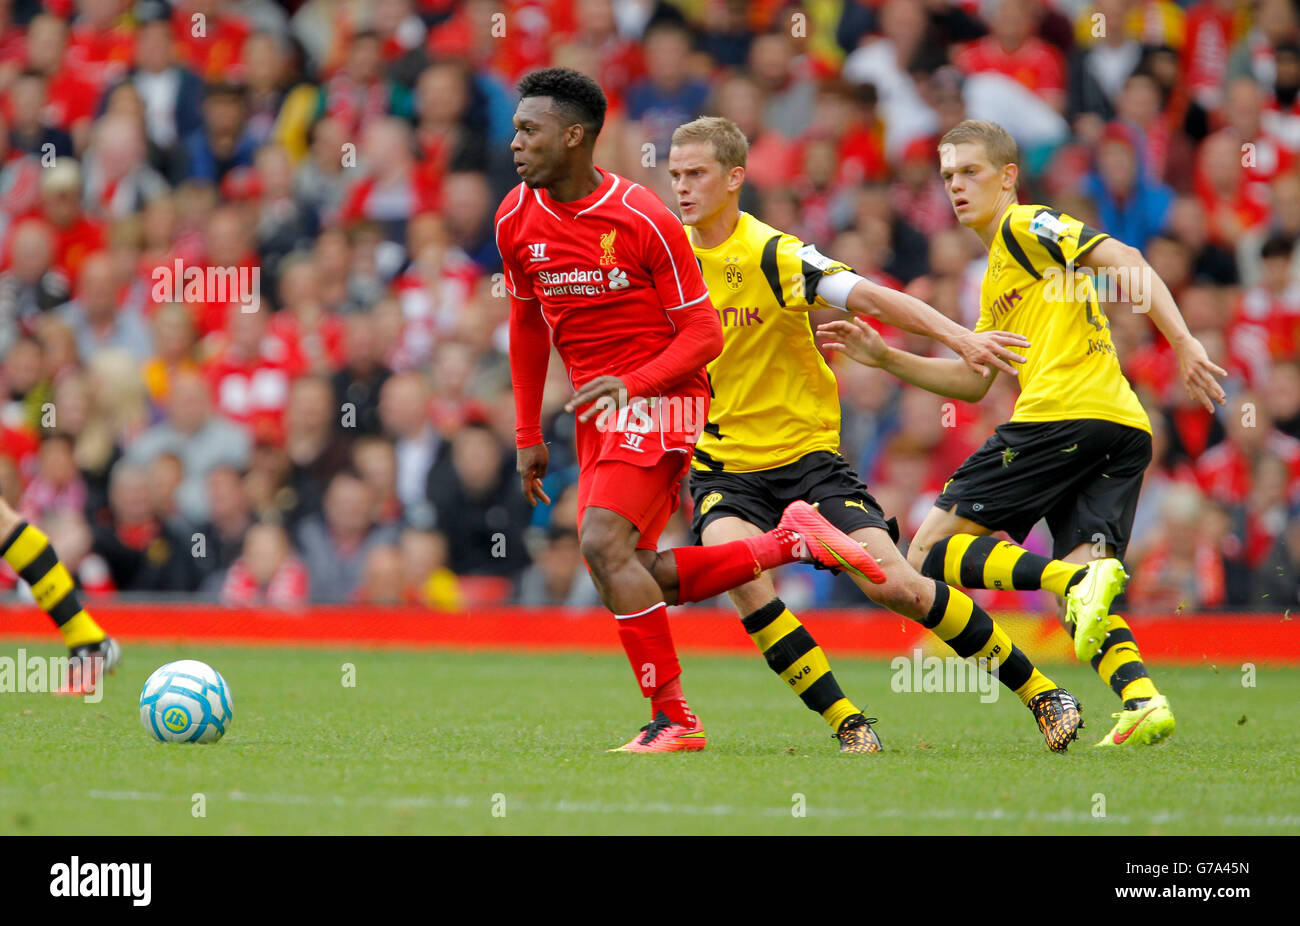 Liverpool's Daniel Sturridge in action during the Pre-Season friendly match at Anfield Stadium, Liverpool. Stock Photo